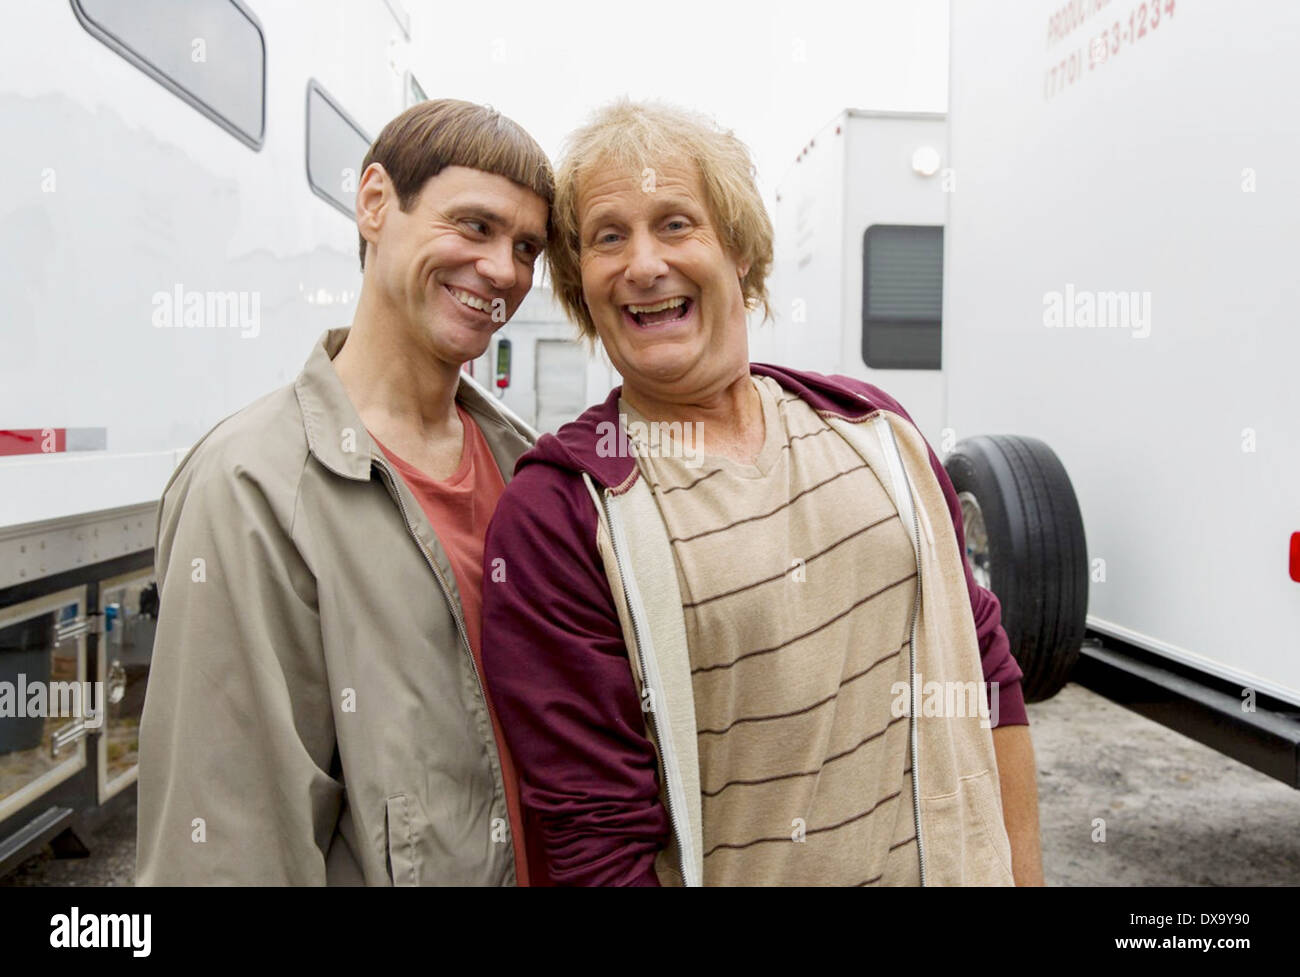 DUMB AND DUMBER TO 2014 Universal Pictures film with Jim Carrey at left as Lloyd Christmas  and Jeff Daniels as Harry Dunne Stock Photo